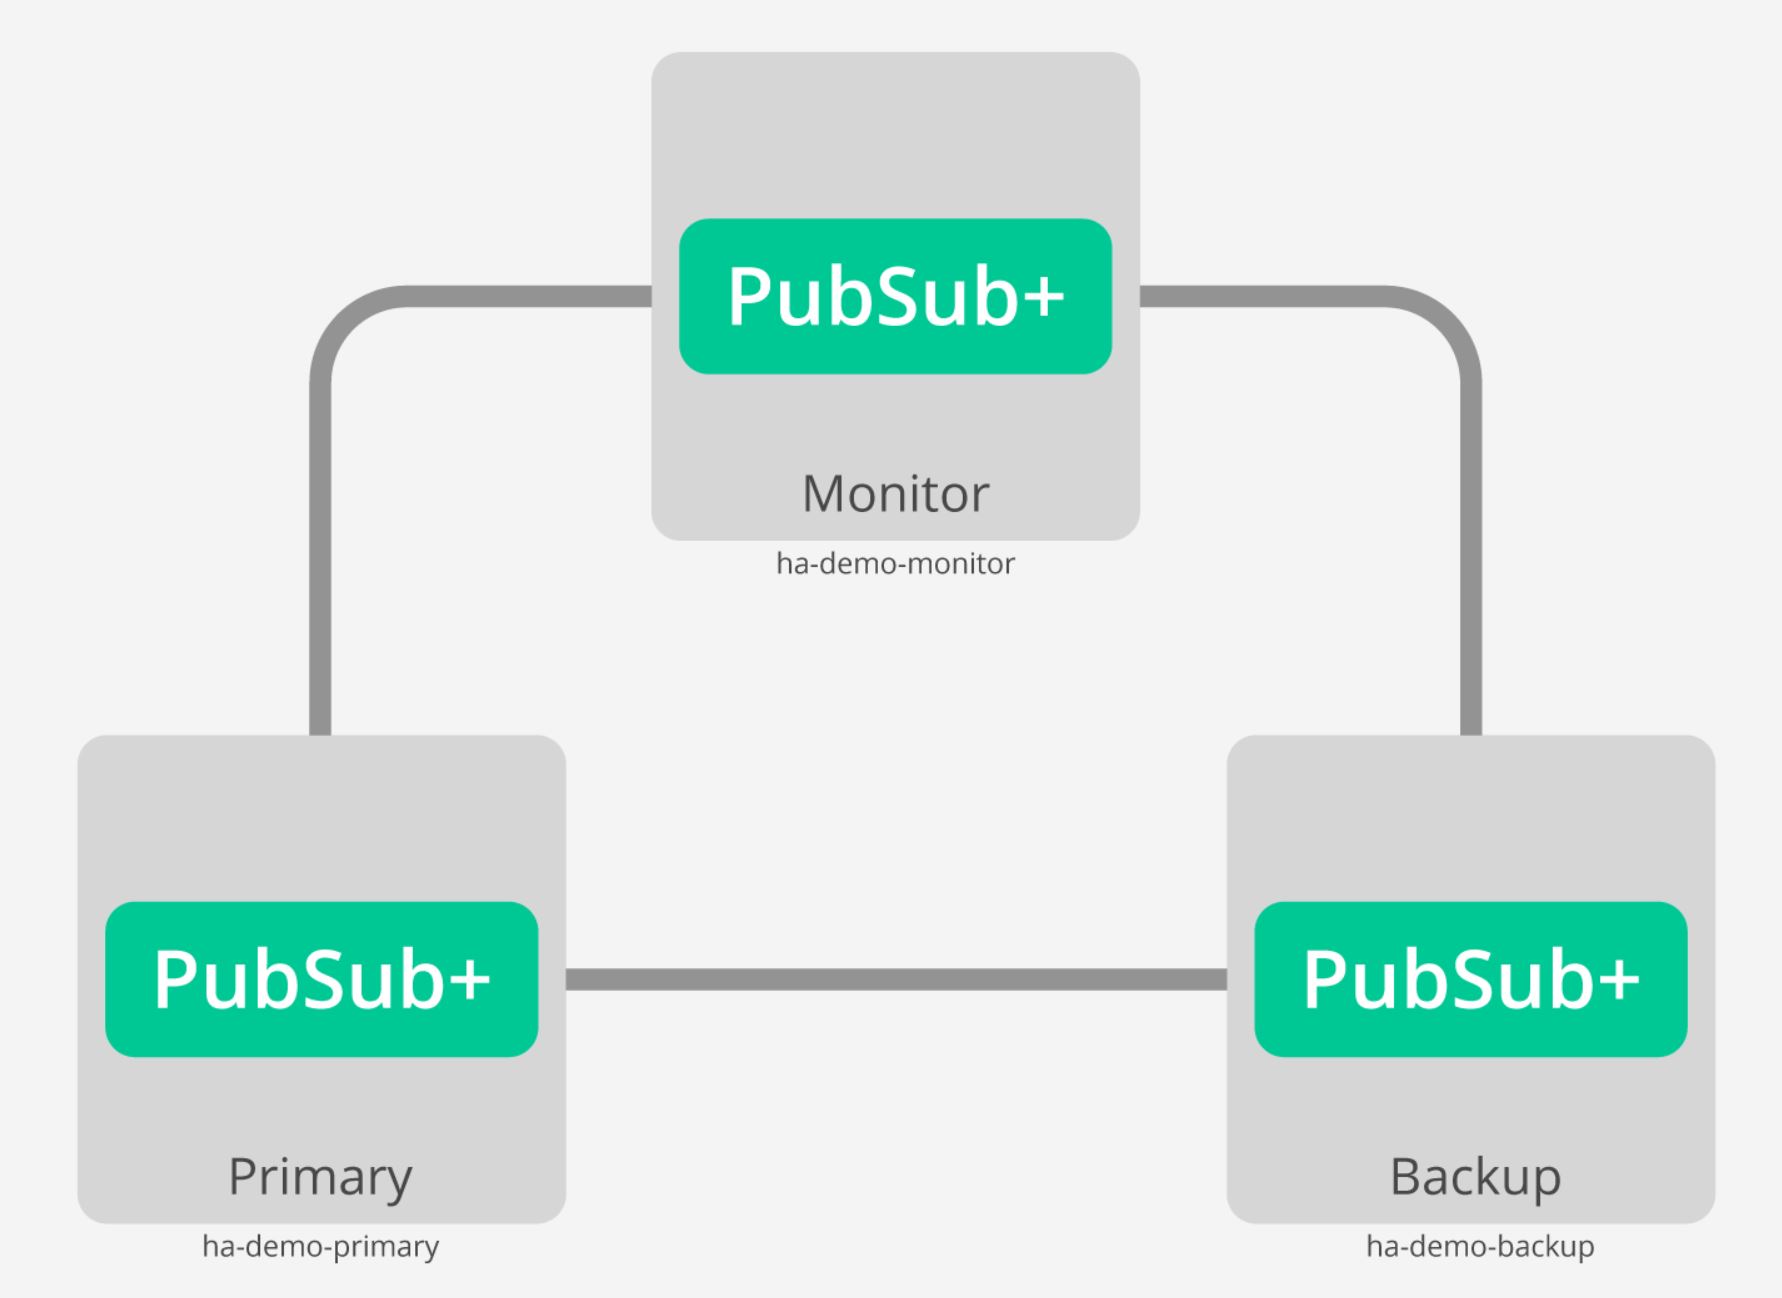 >How does HA work with PubSub+ Event Broker?